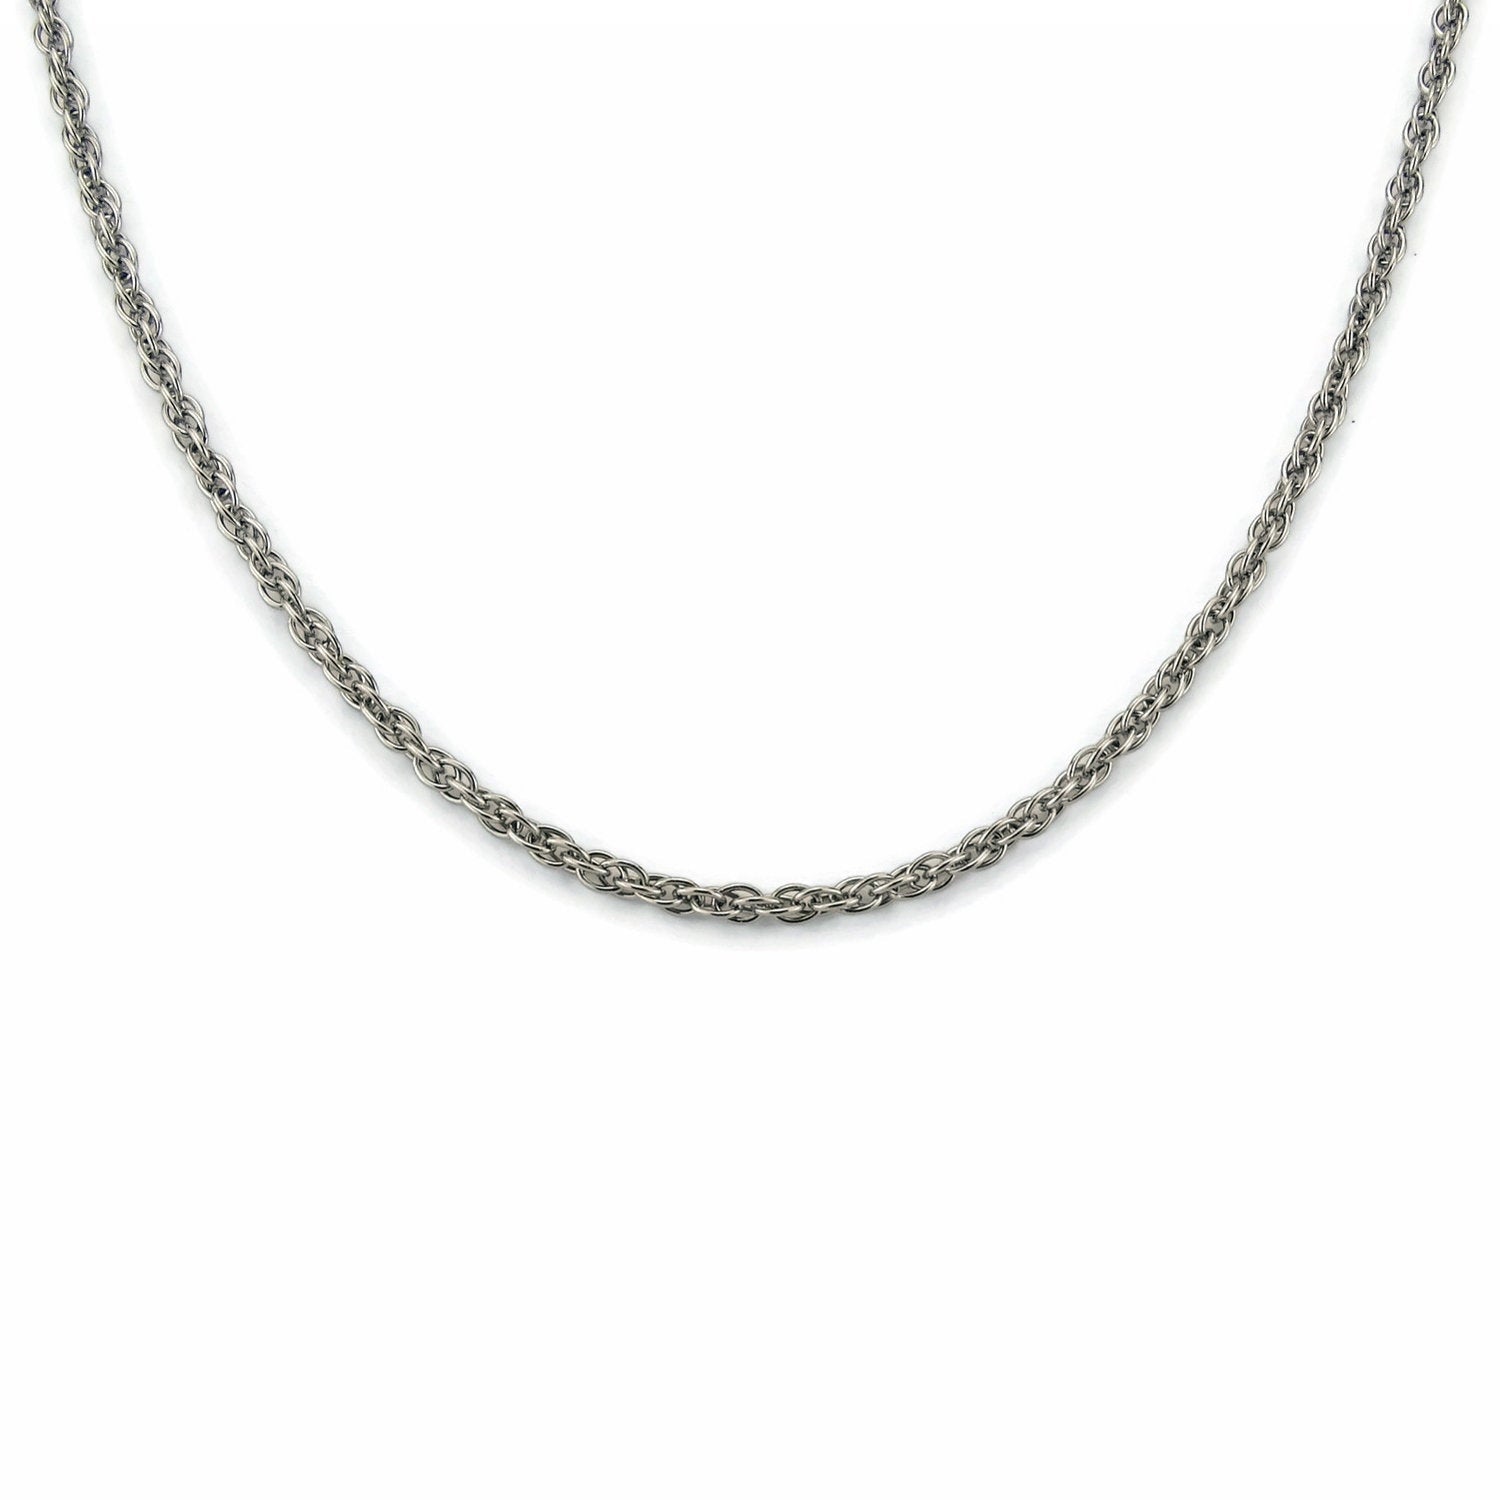  R.H. Jewelry Stainless Steel Chain Small Chain: Chain